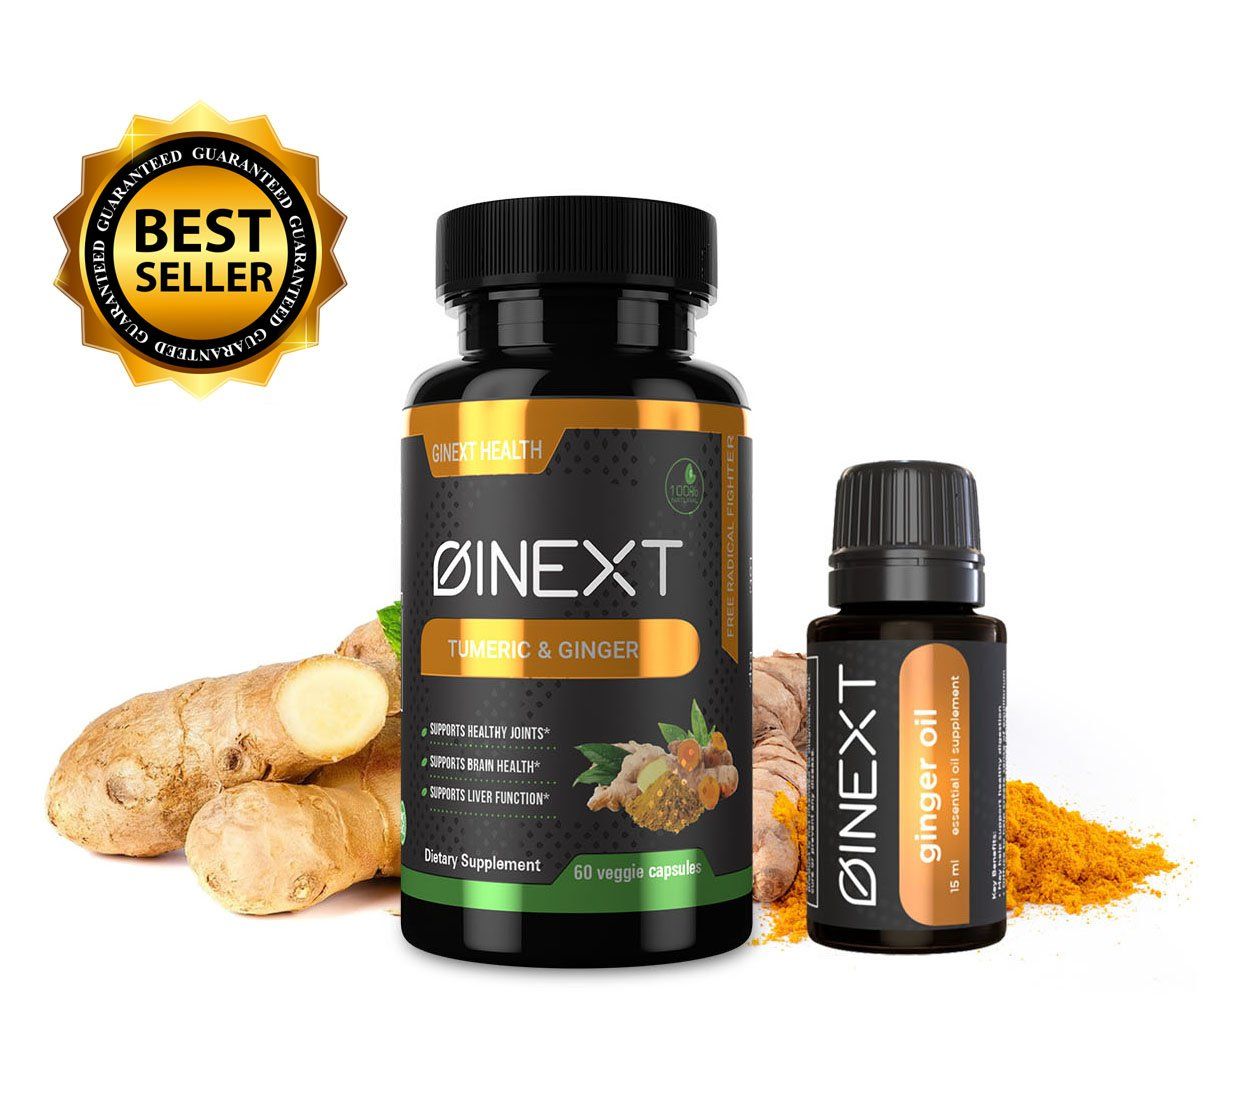 GINEXT Save Money By Buying These Products Together!